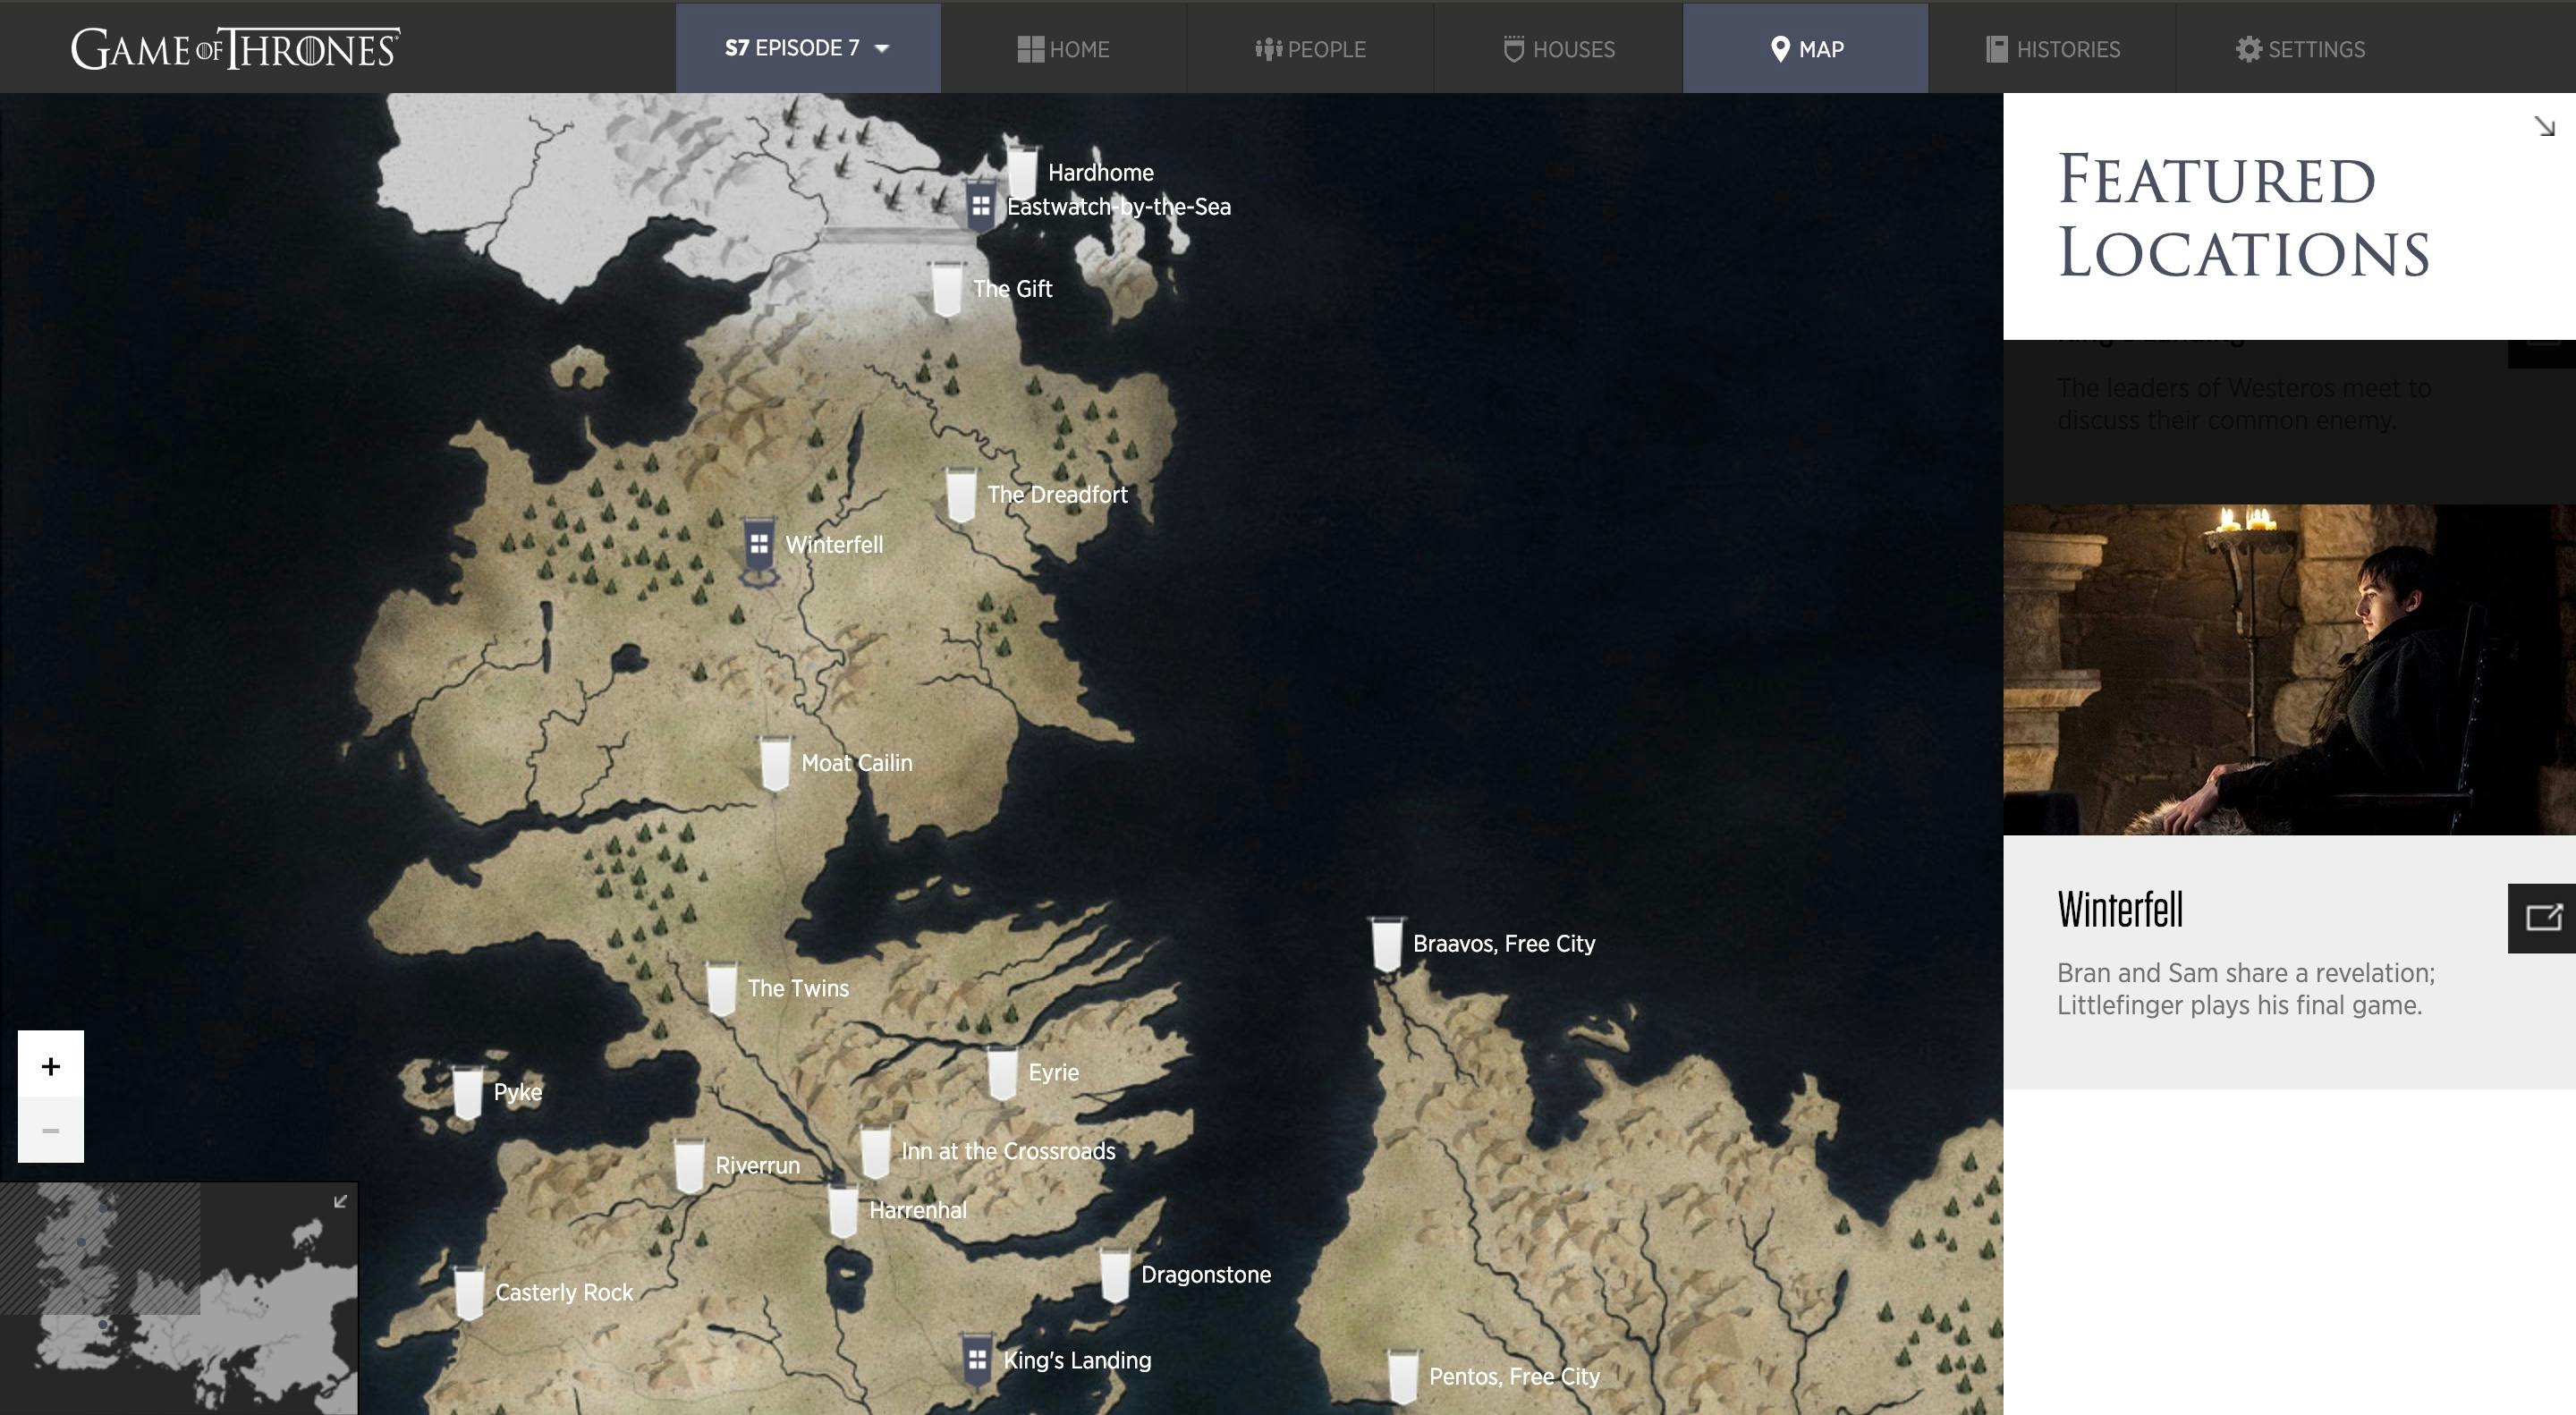 game of thrones map pdf - Google Search  Free city, A dance with dragons,  Game of thrones map